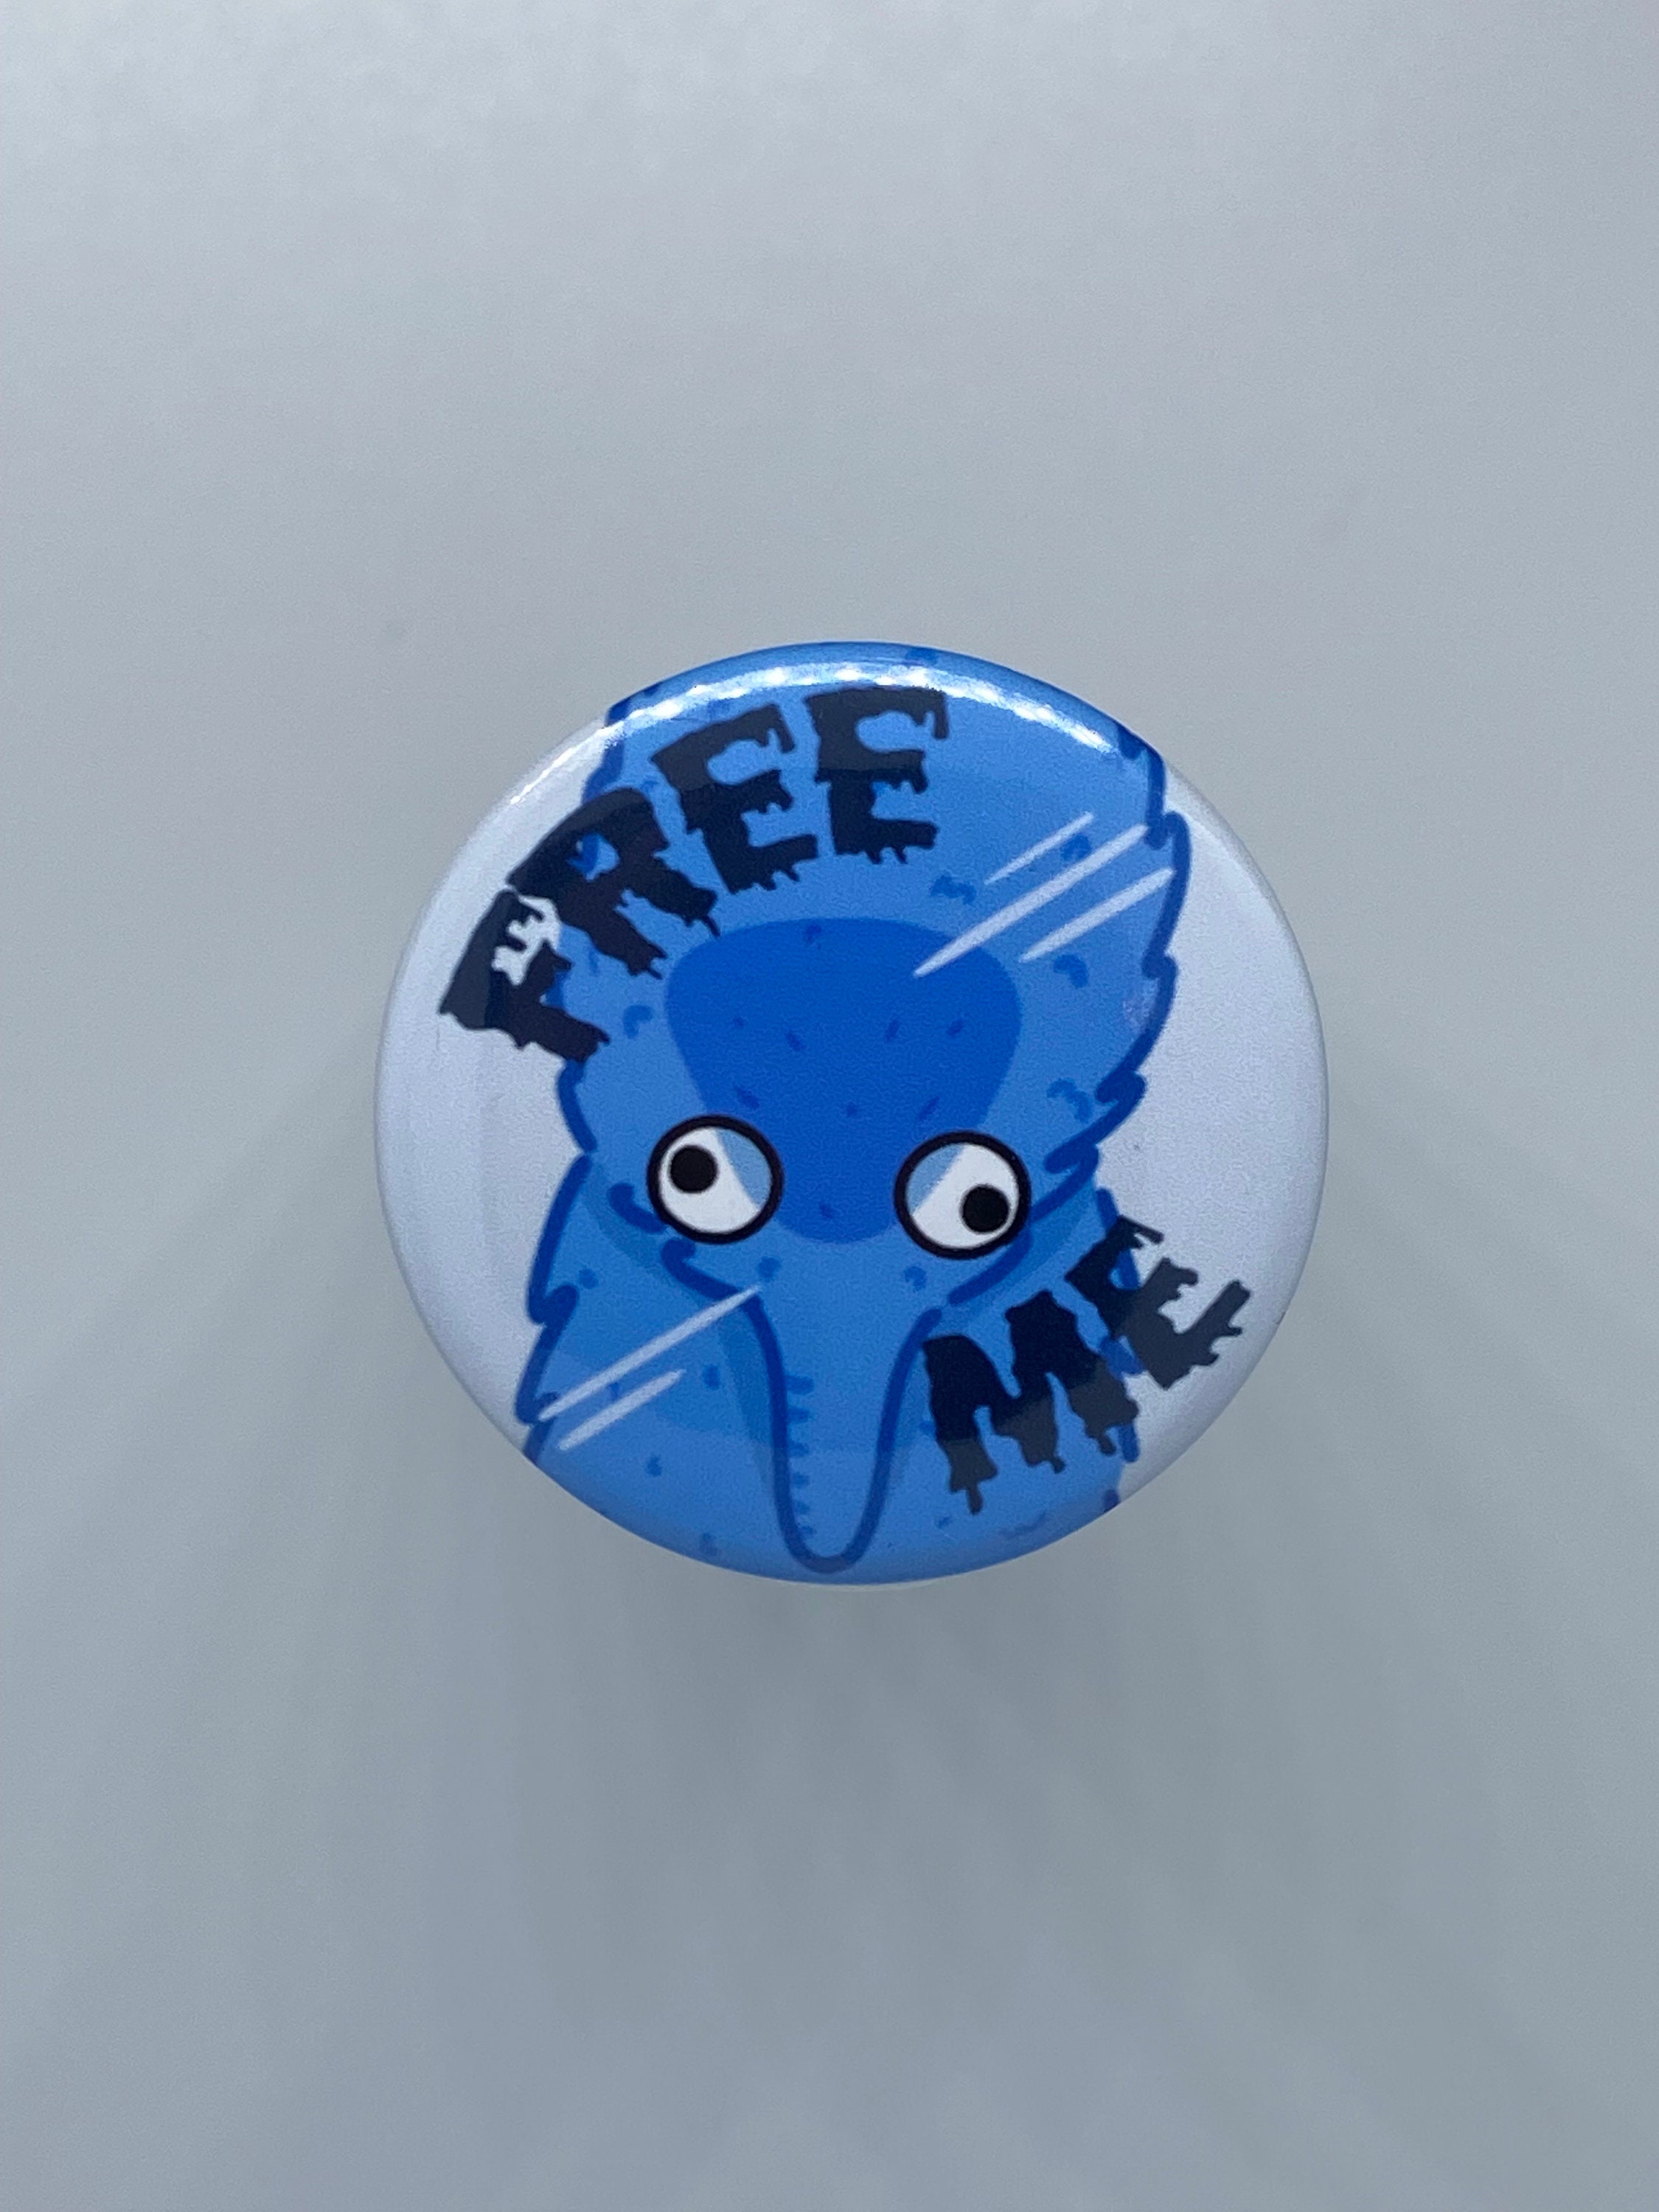 Worm on a string funny button - free me worm on a string cursed button -  cursed funny meme button worm on a string